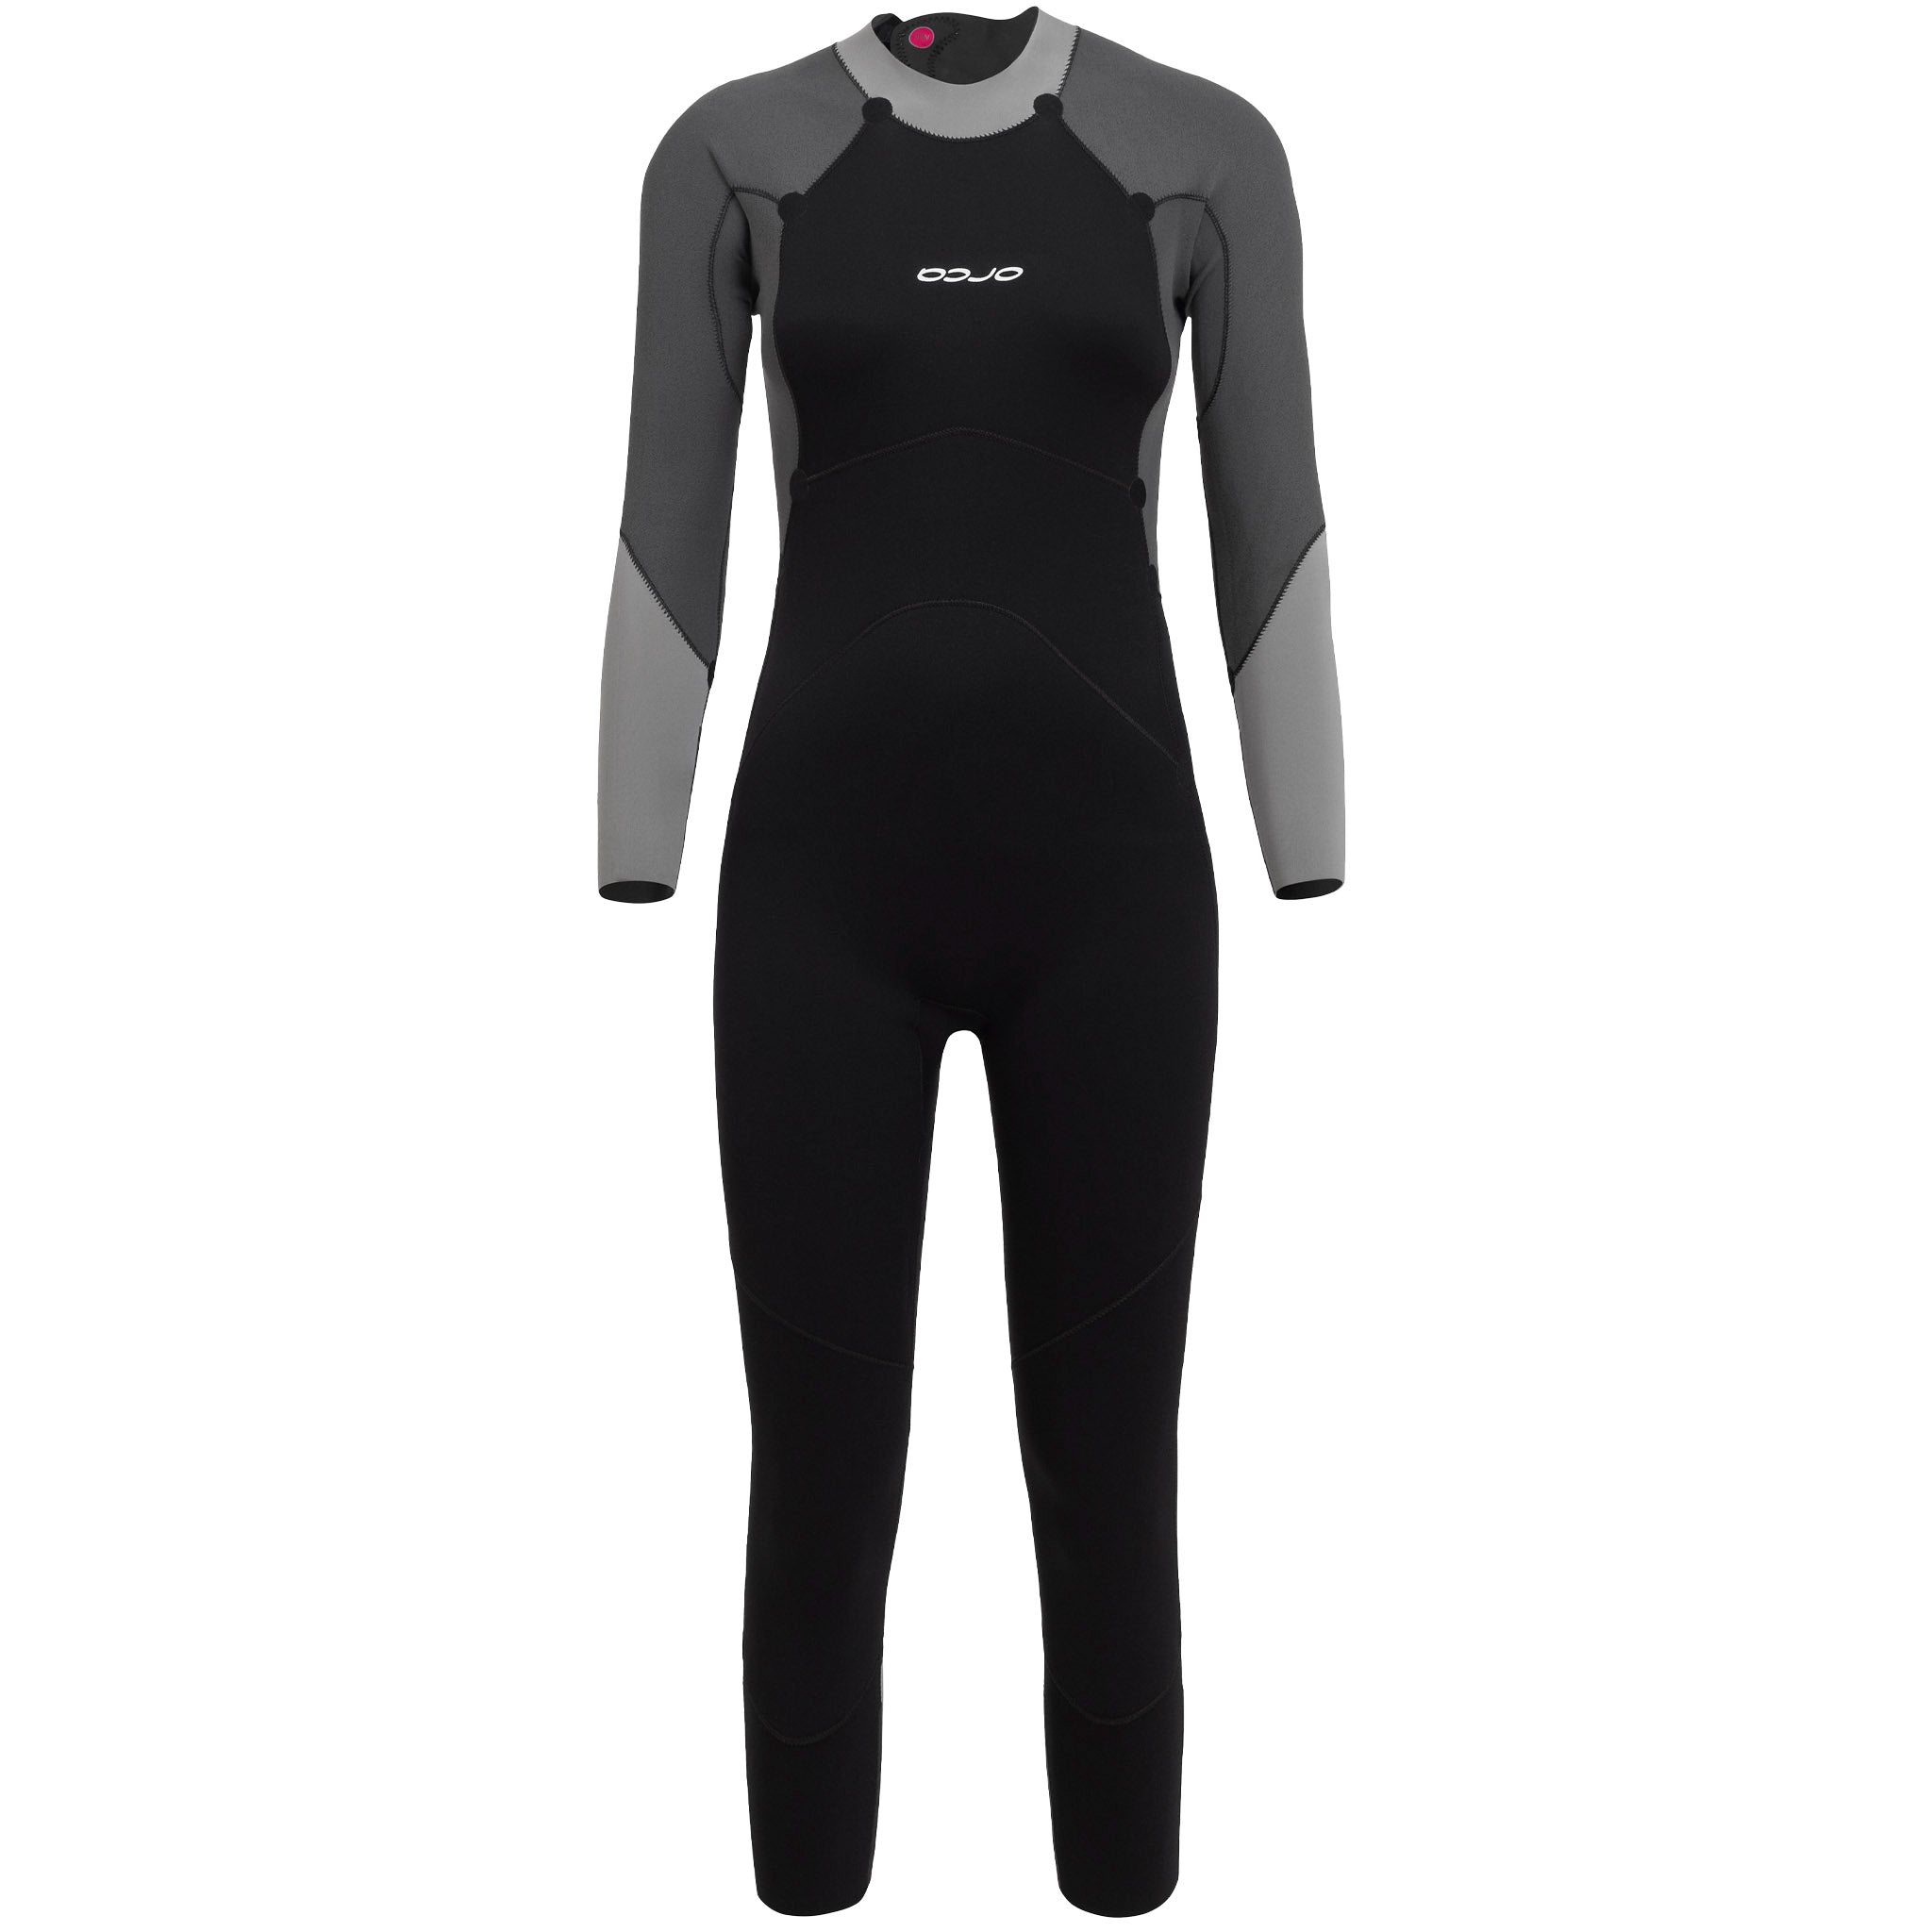 Orca Women's Athlex Float Swimming Wetsuit | View Inside showing panel layout